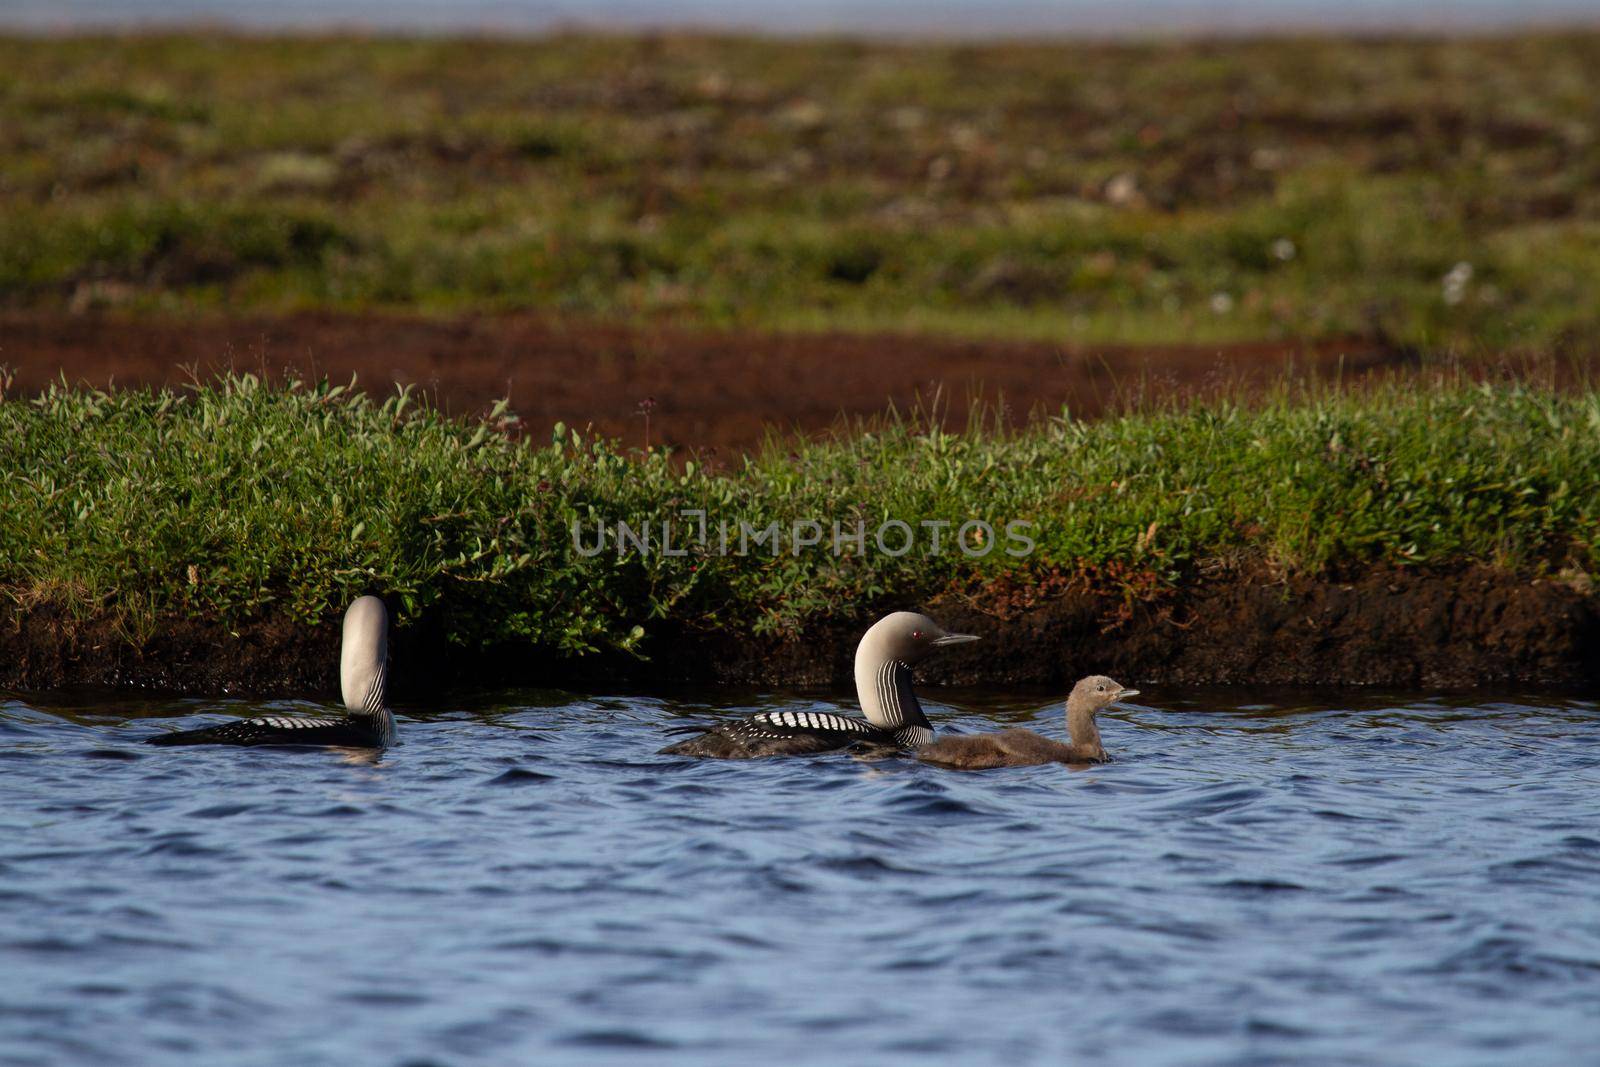 Two adult Pacific Loon or Pacific Diver and juvenile swimming around in an arctic lake with willows in the background, Arviat Nunavut